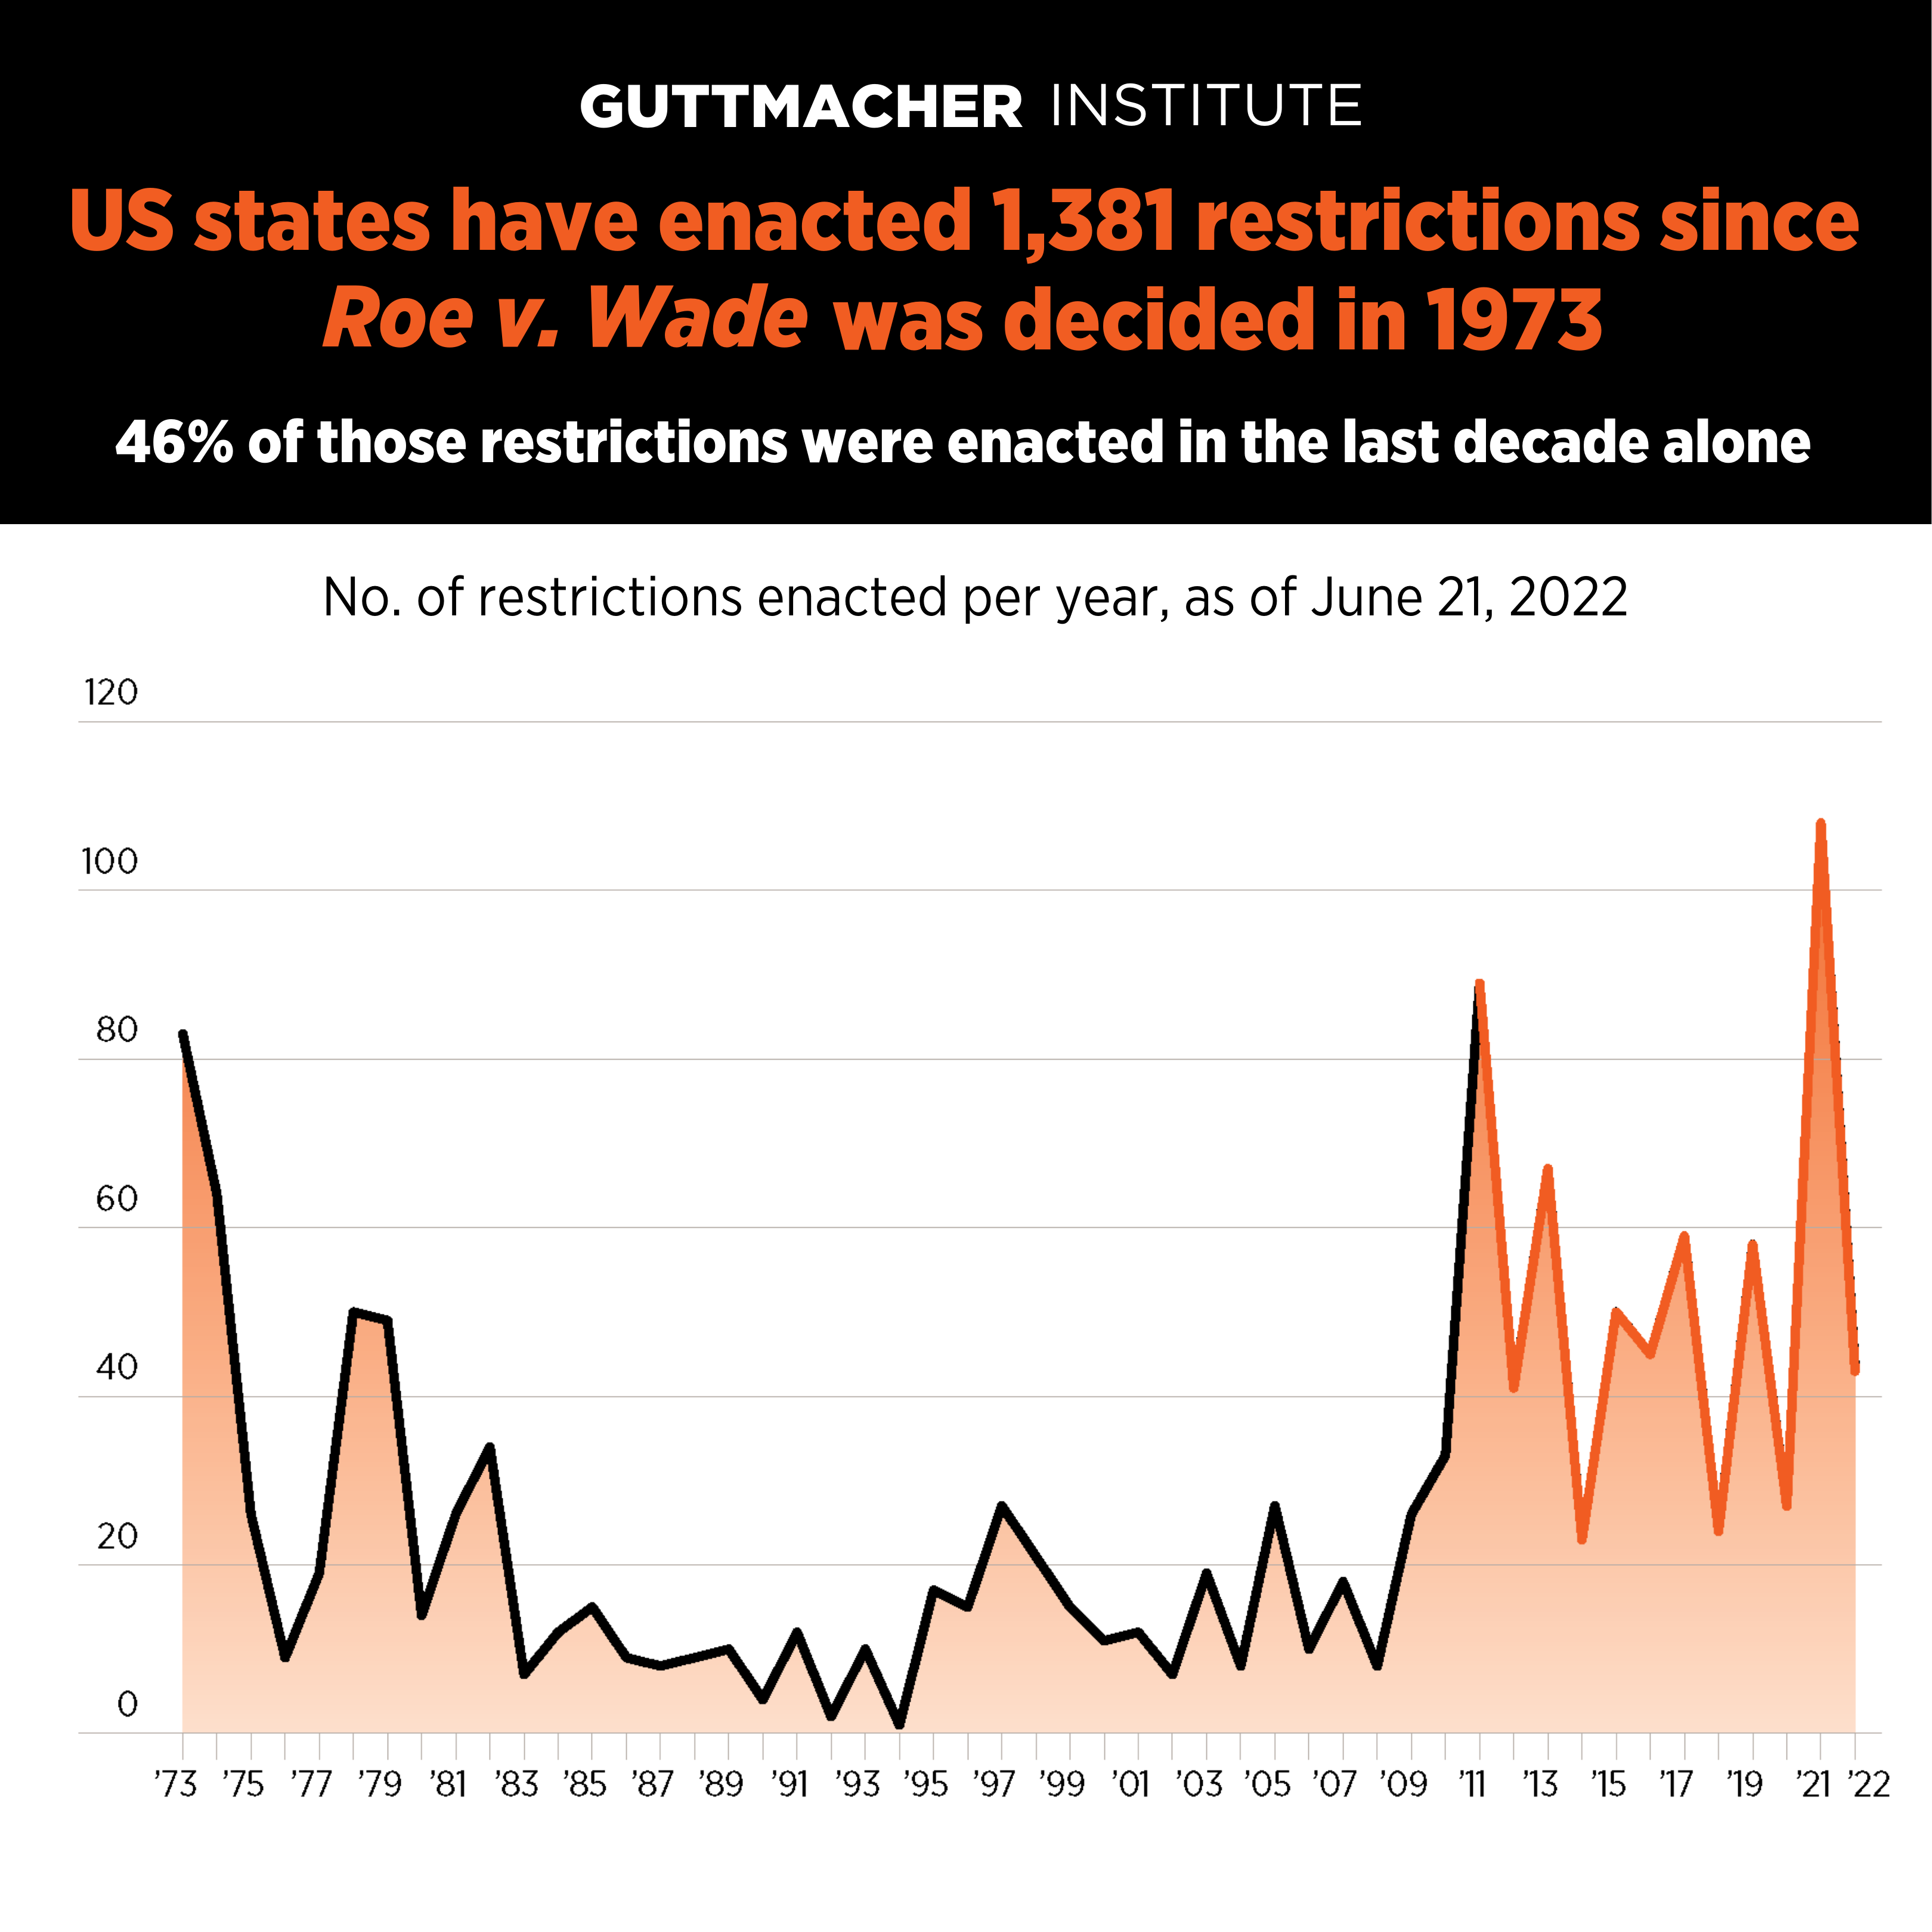 Graph from Guttmacher Institute titled "US States have enacted 1,381 restrictions since Roe v. Wade was decided in 1973"